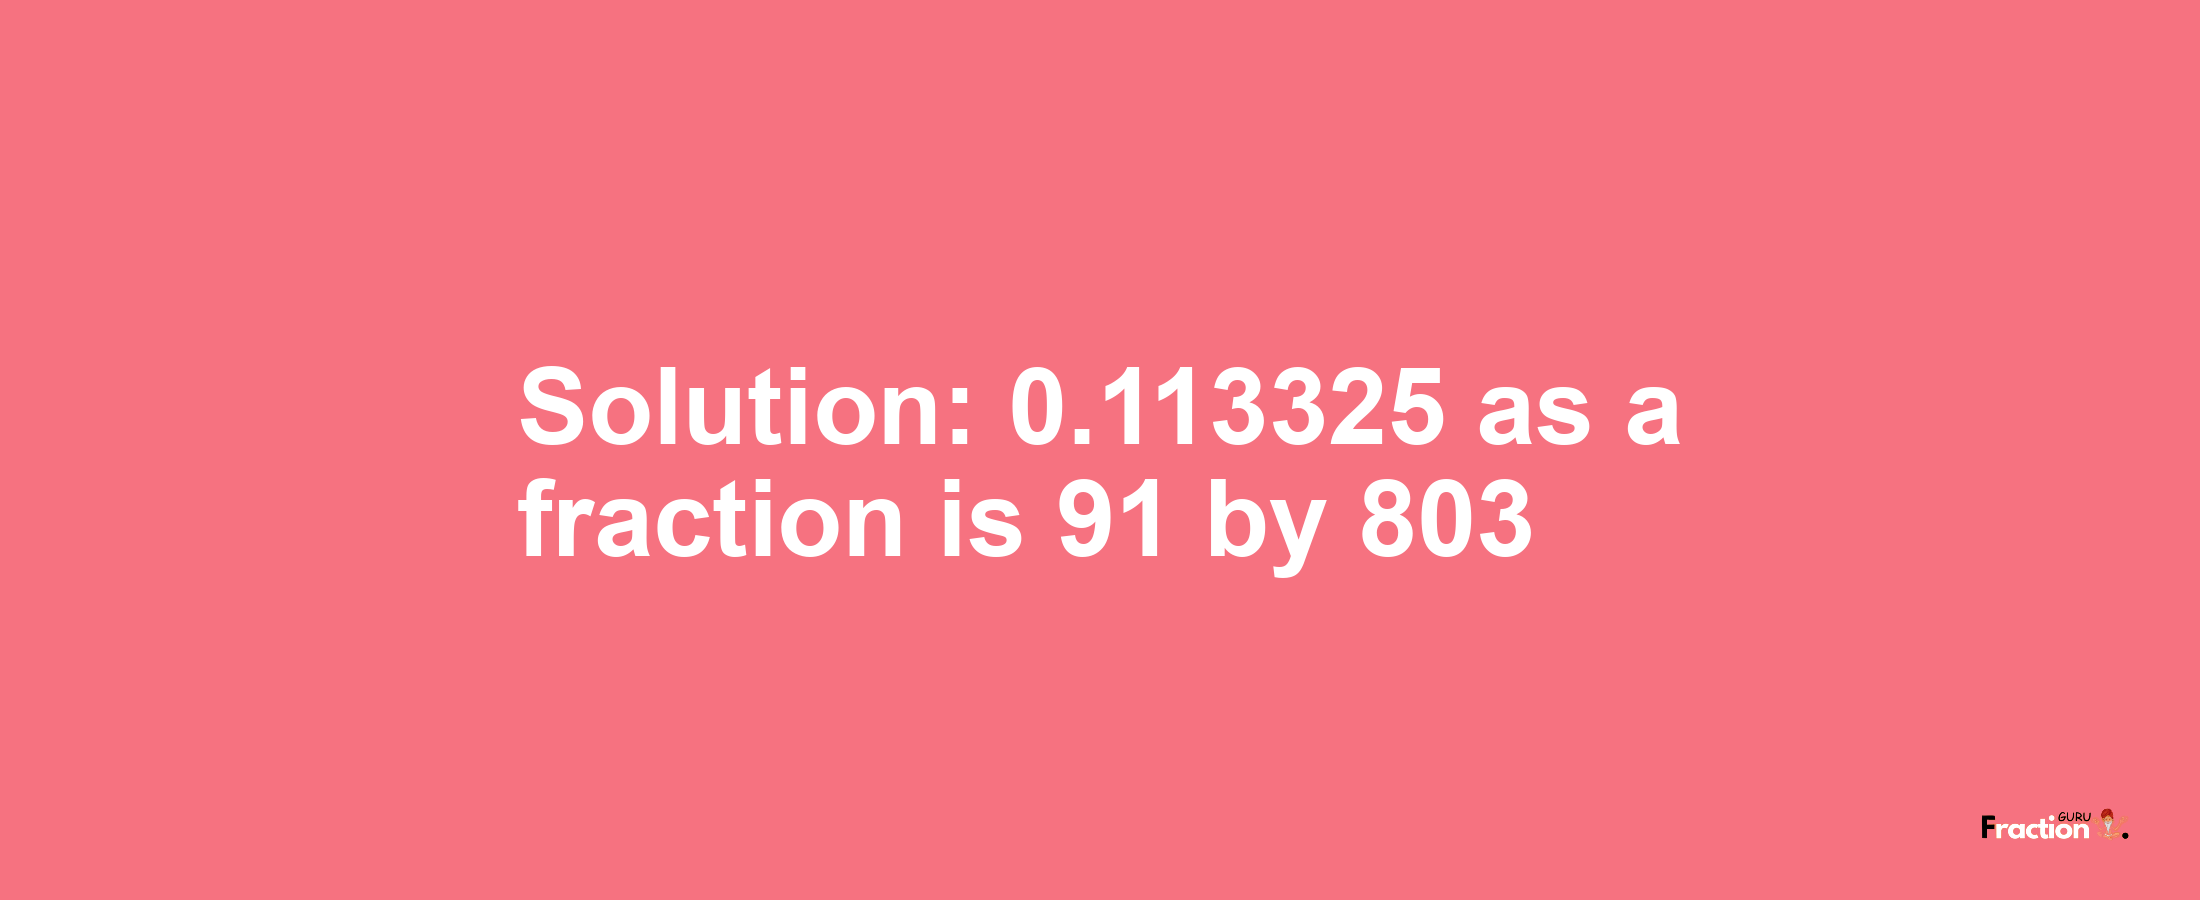 Solution:0.113325 as a fraction is 91/803